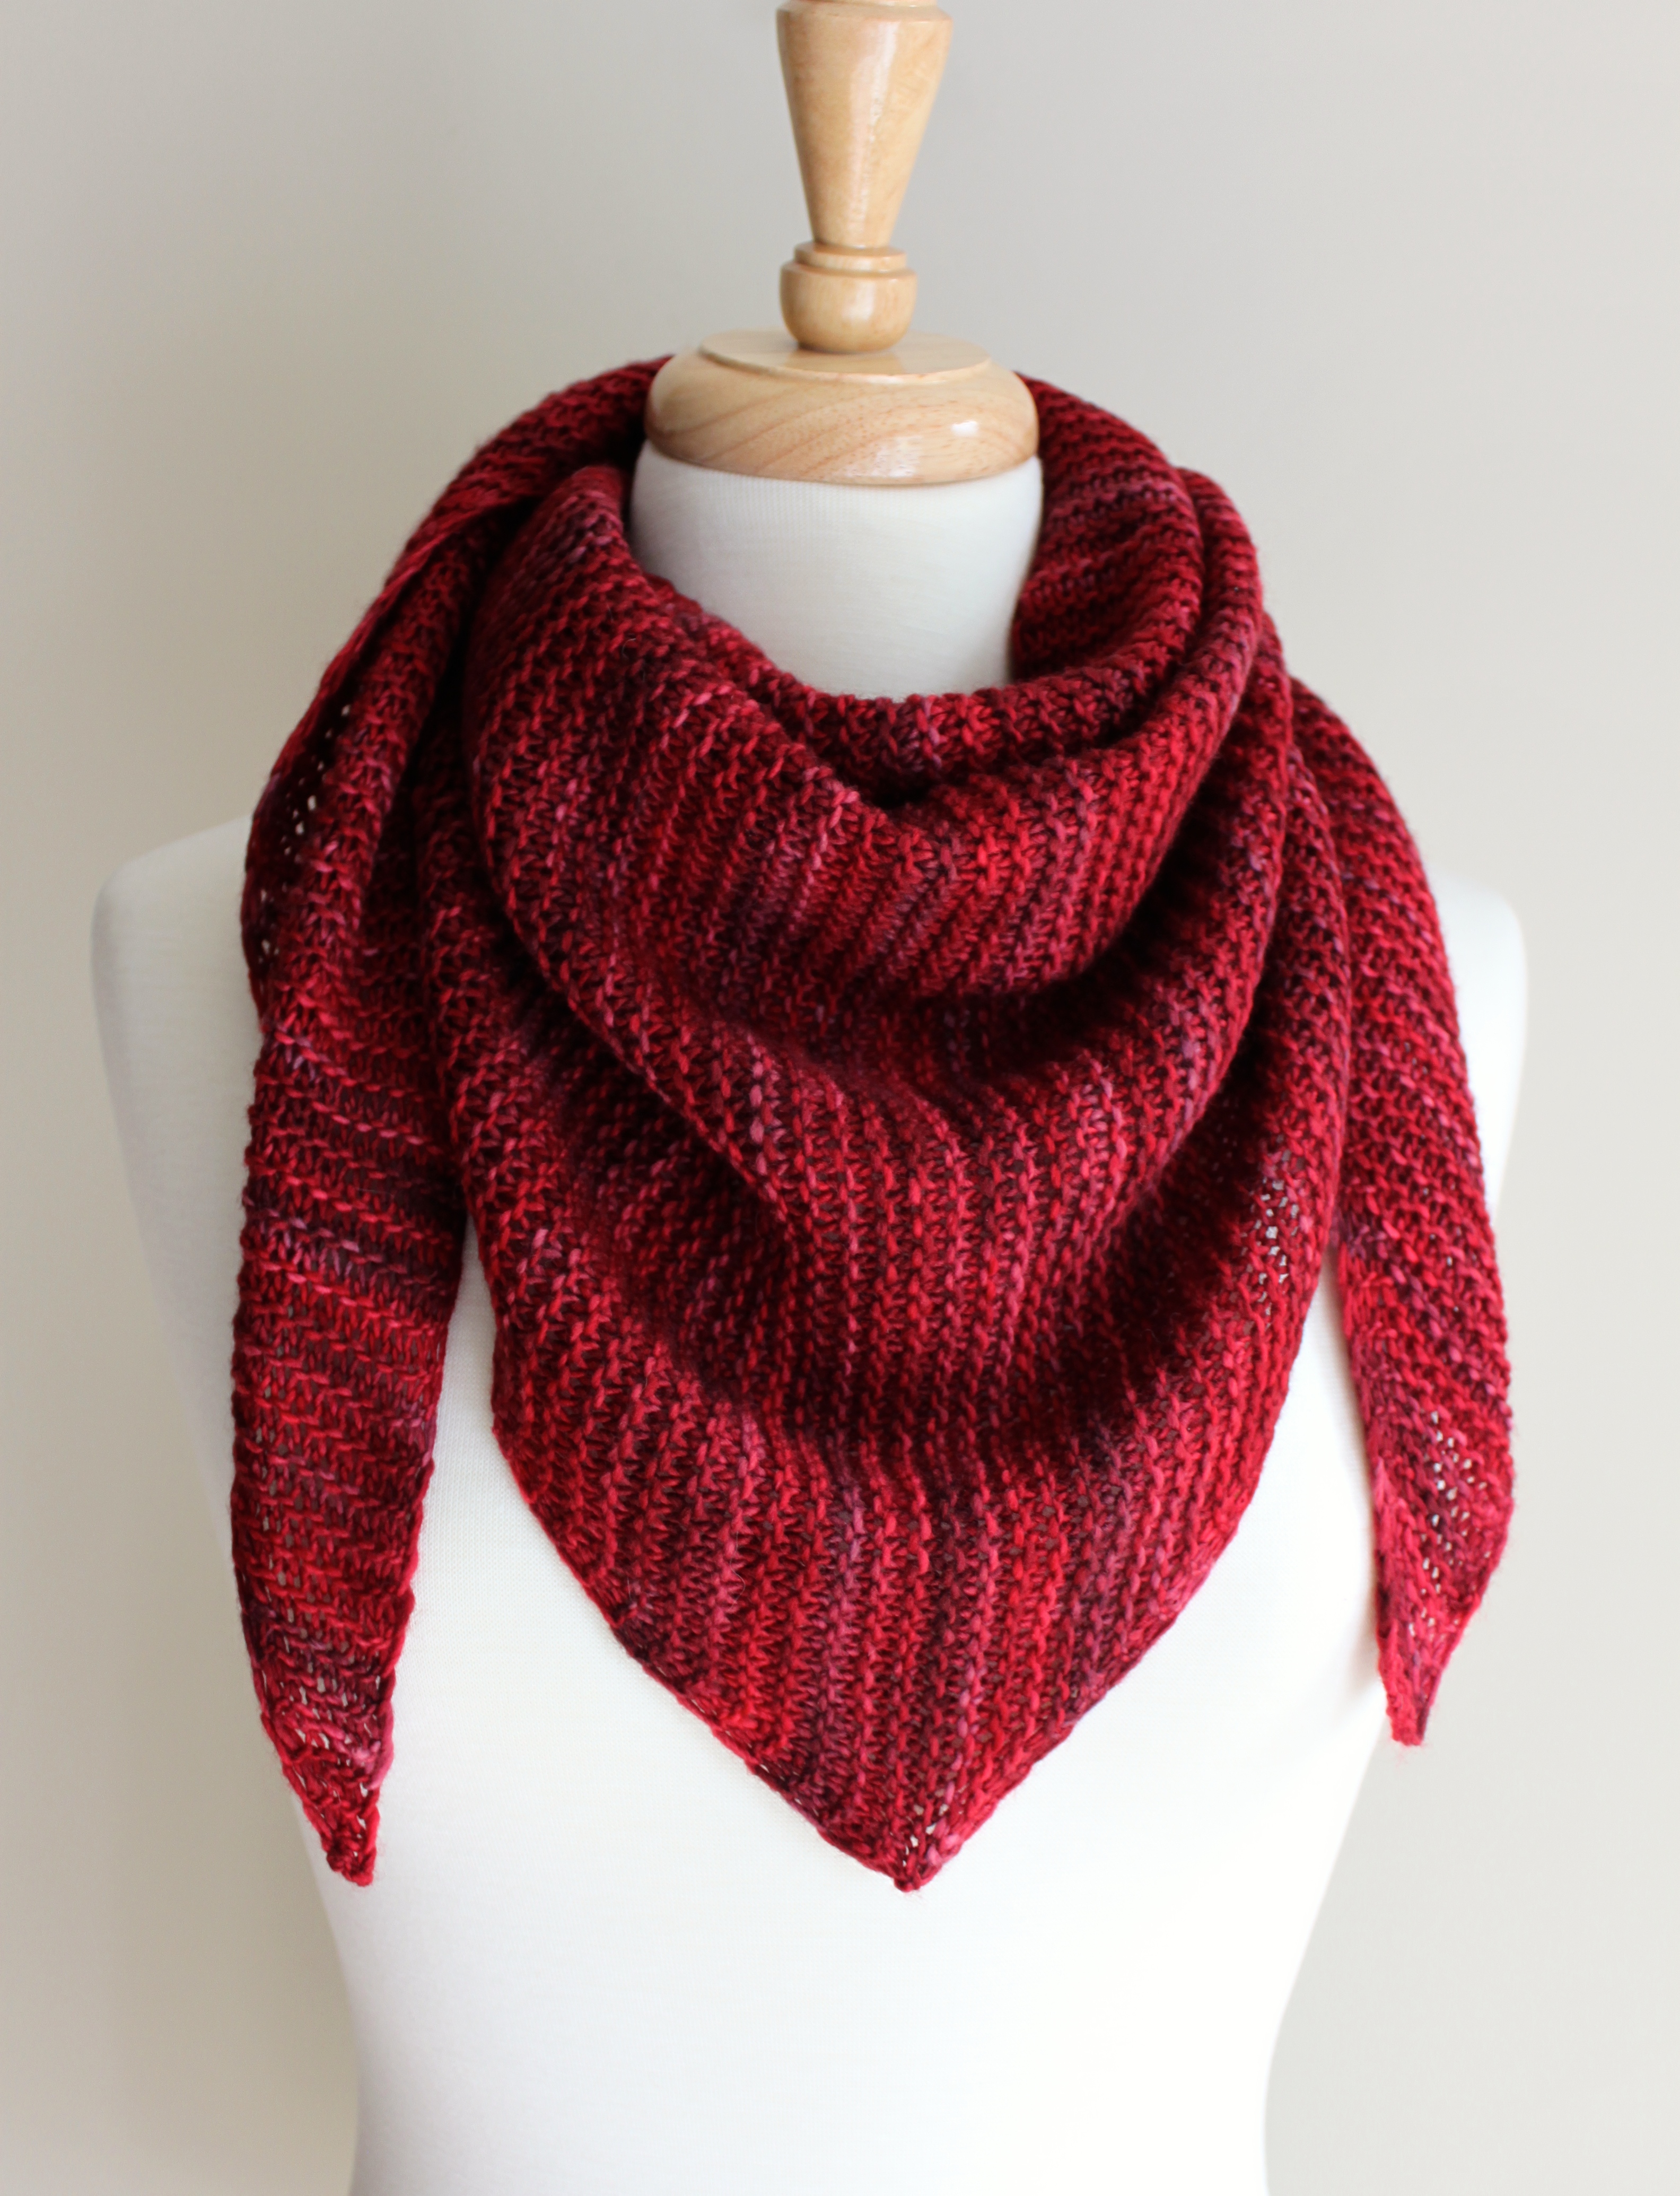 Free Knitting Patterns: Truly Triangular Scarf - Leah Michelle Designs